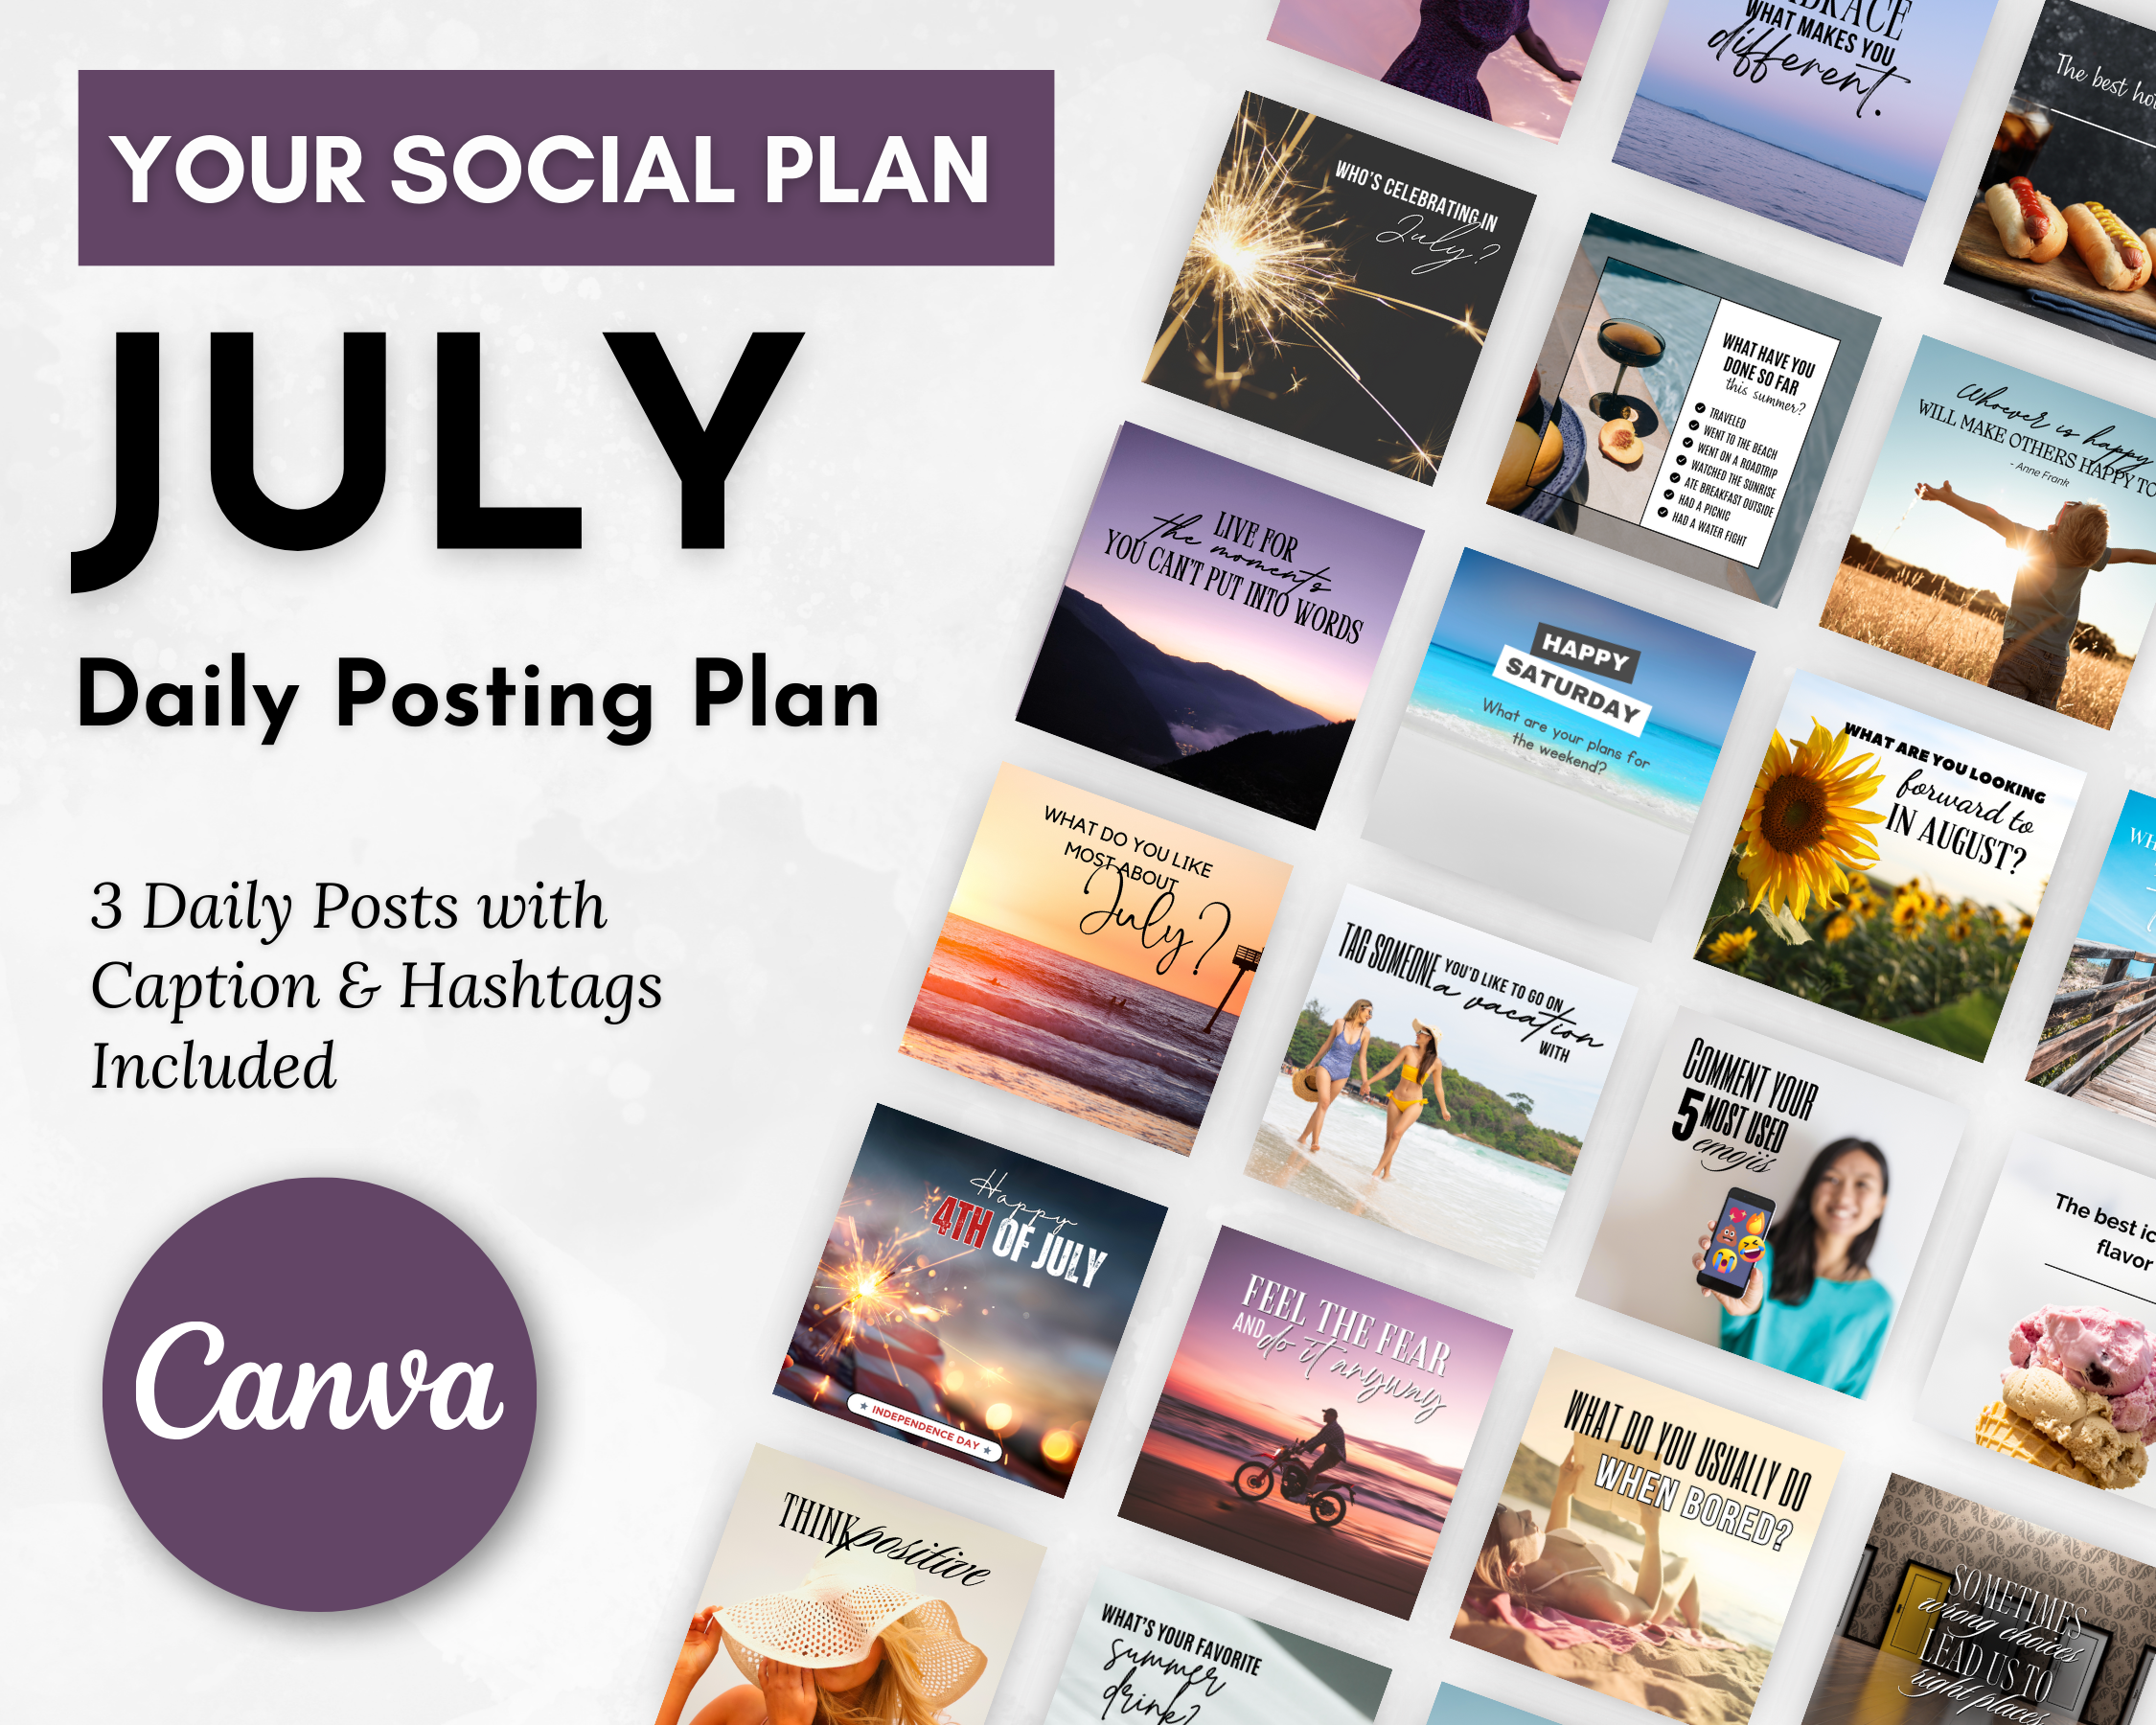 A graphic displays a "July Daily Posting Plan - Your Social Plan" with social media post previews. It includes a mix of motivational quotes, holidays, and lifestyle images, accompanied by captions and hashtags for audience engagement, all created using Get Socially Inclined.